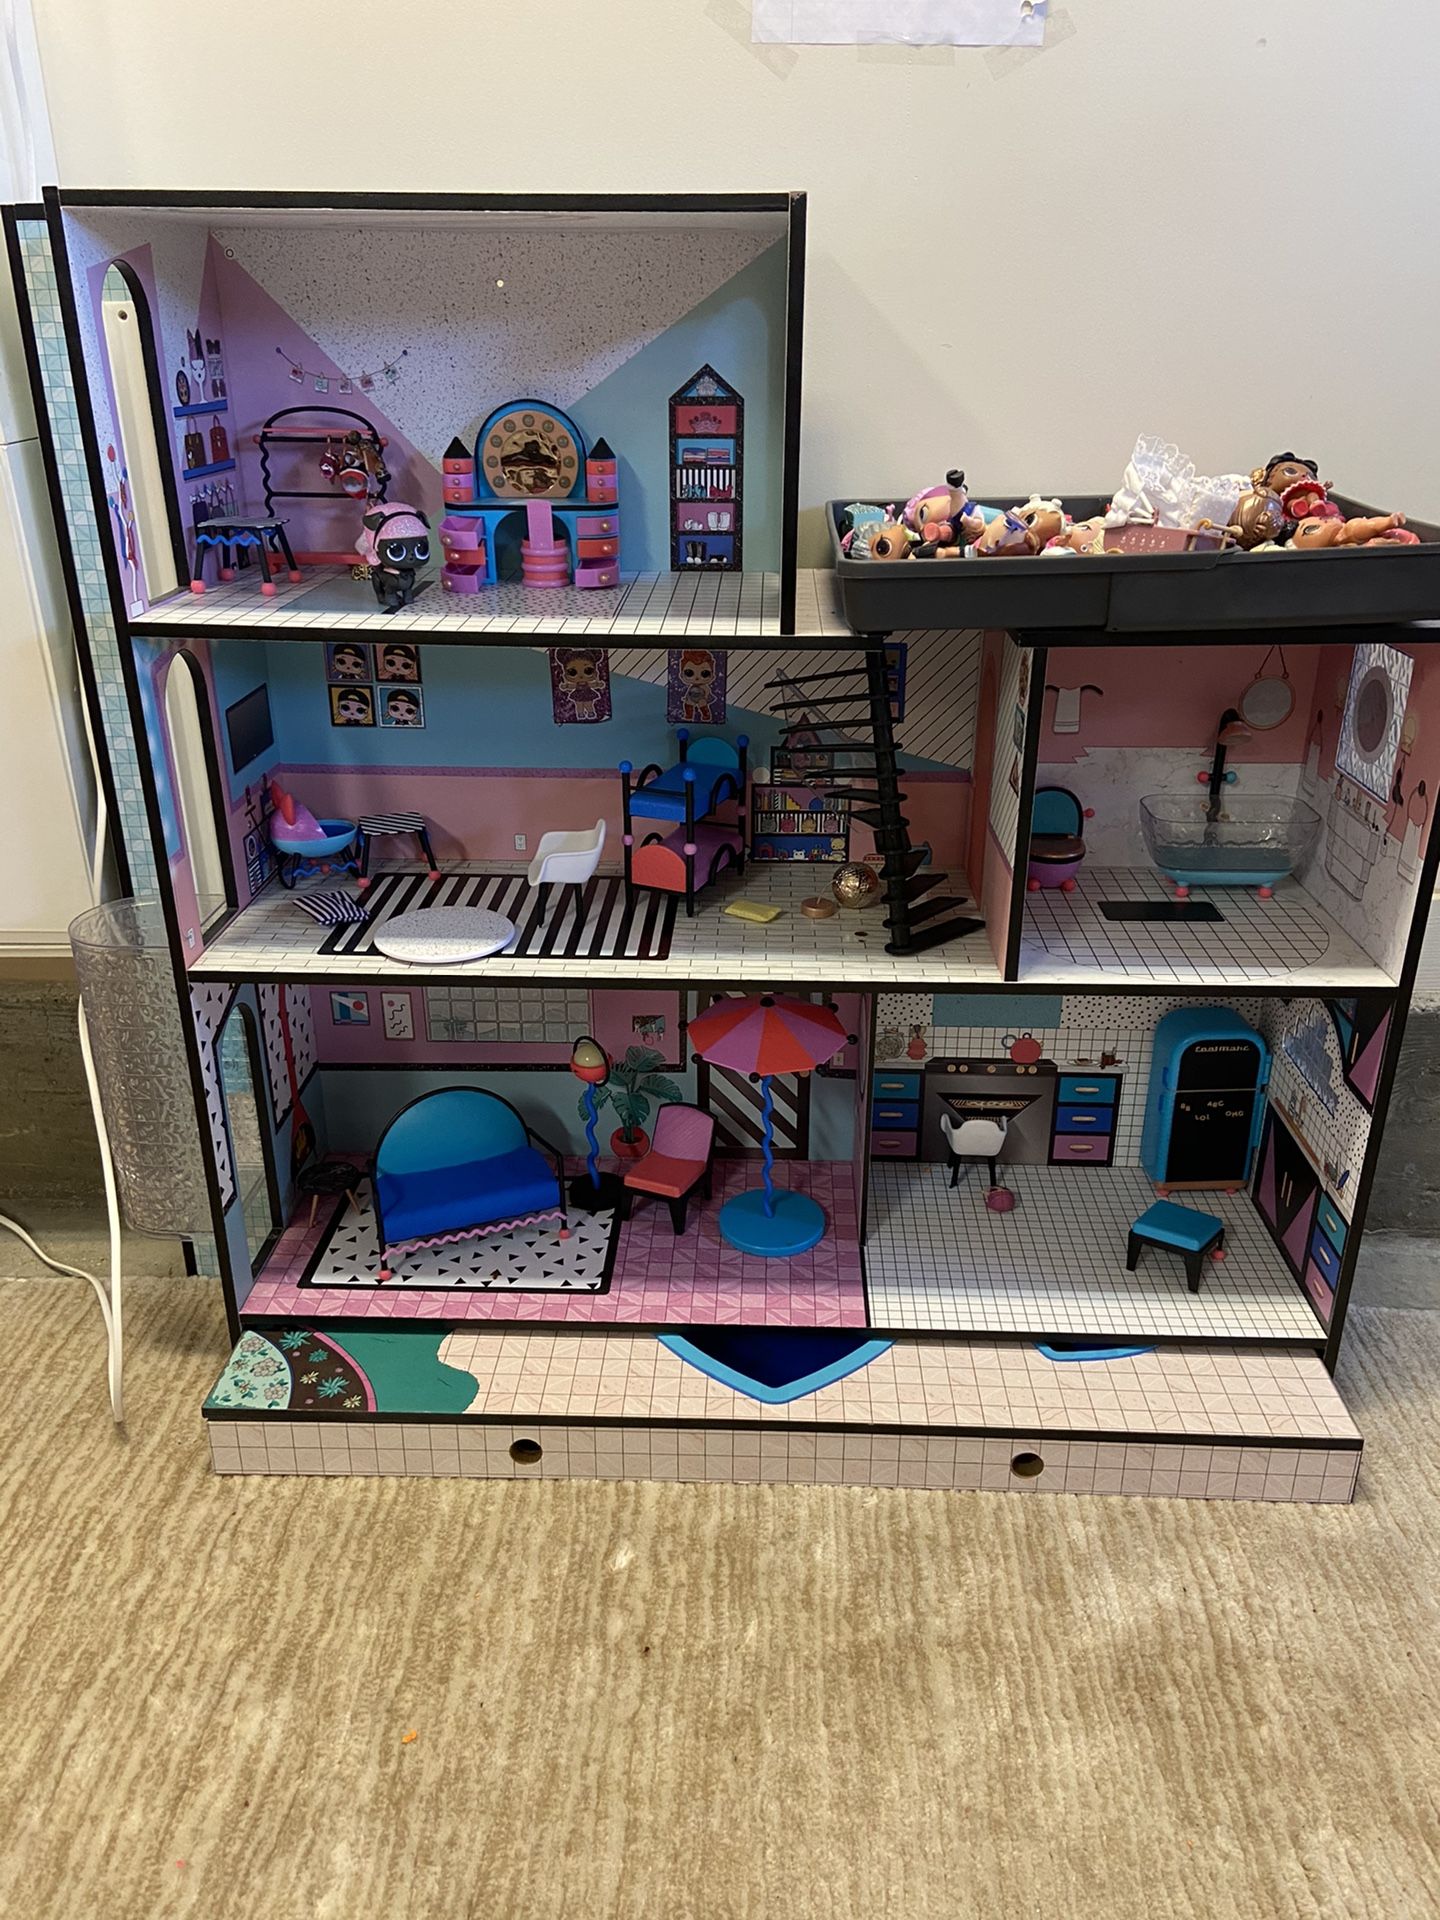 LOL doll house + Furniture/ accessories